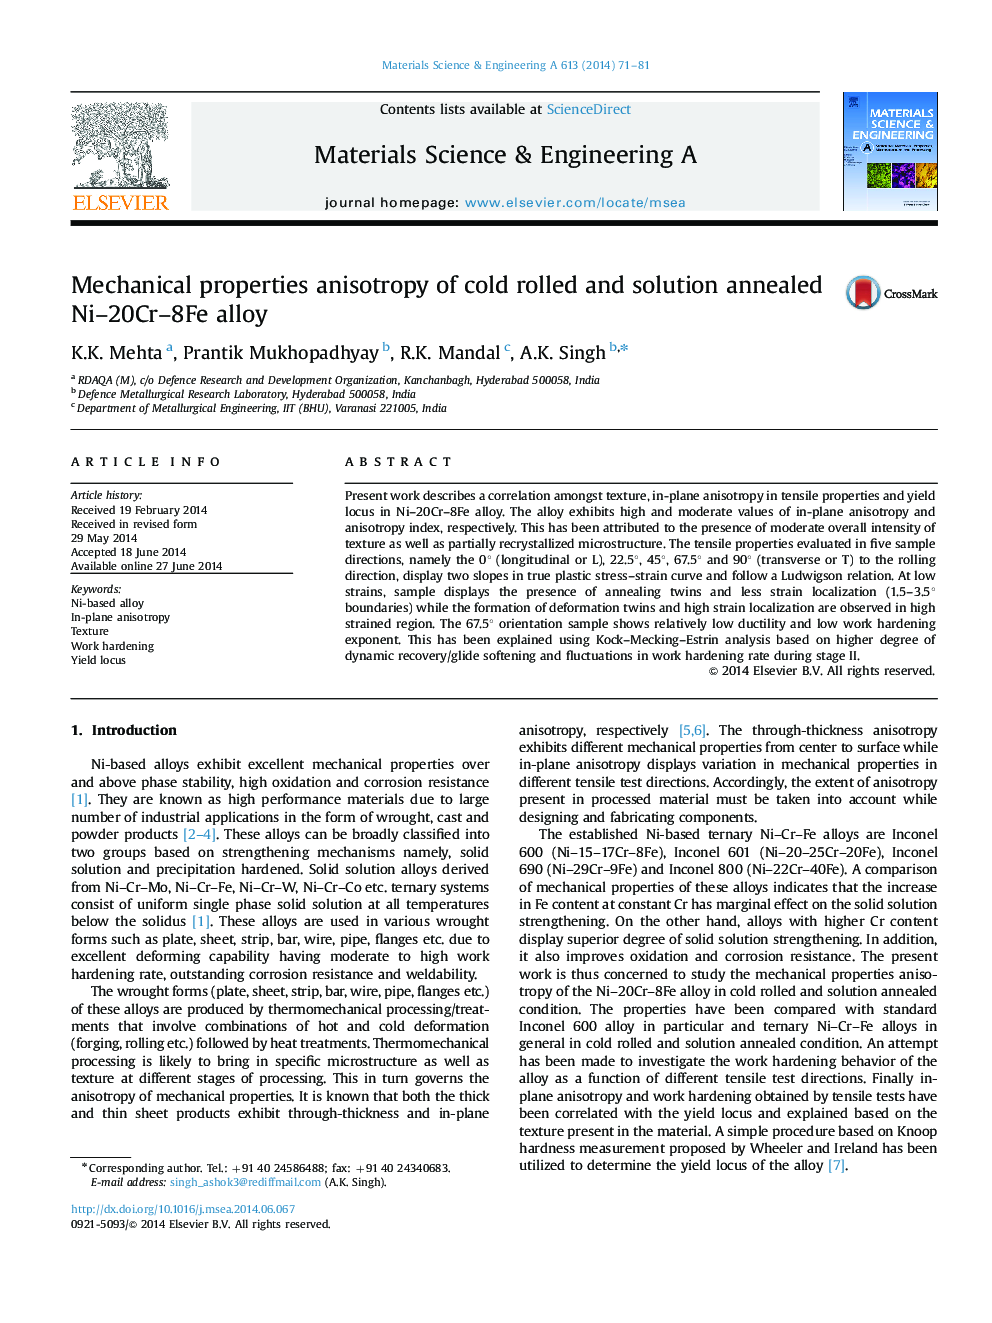 Mechanical properties anisotropy of cold rolled and solution annealed Ni-20Cr-8Fe alloy